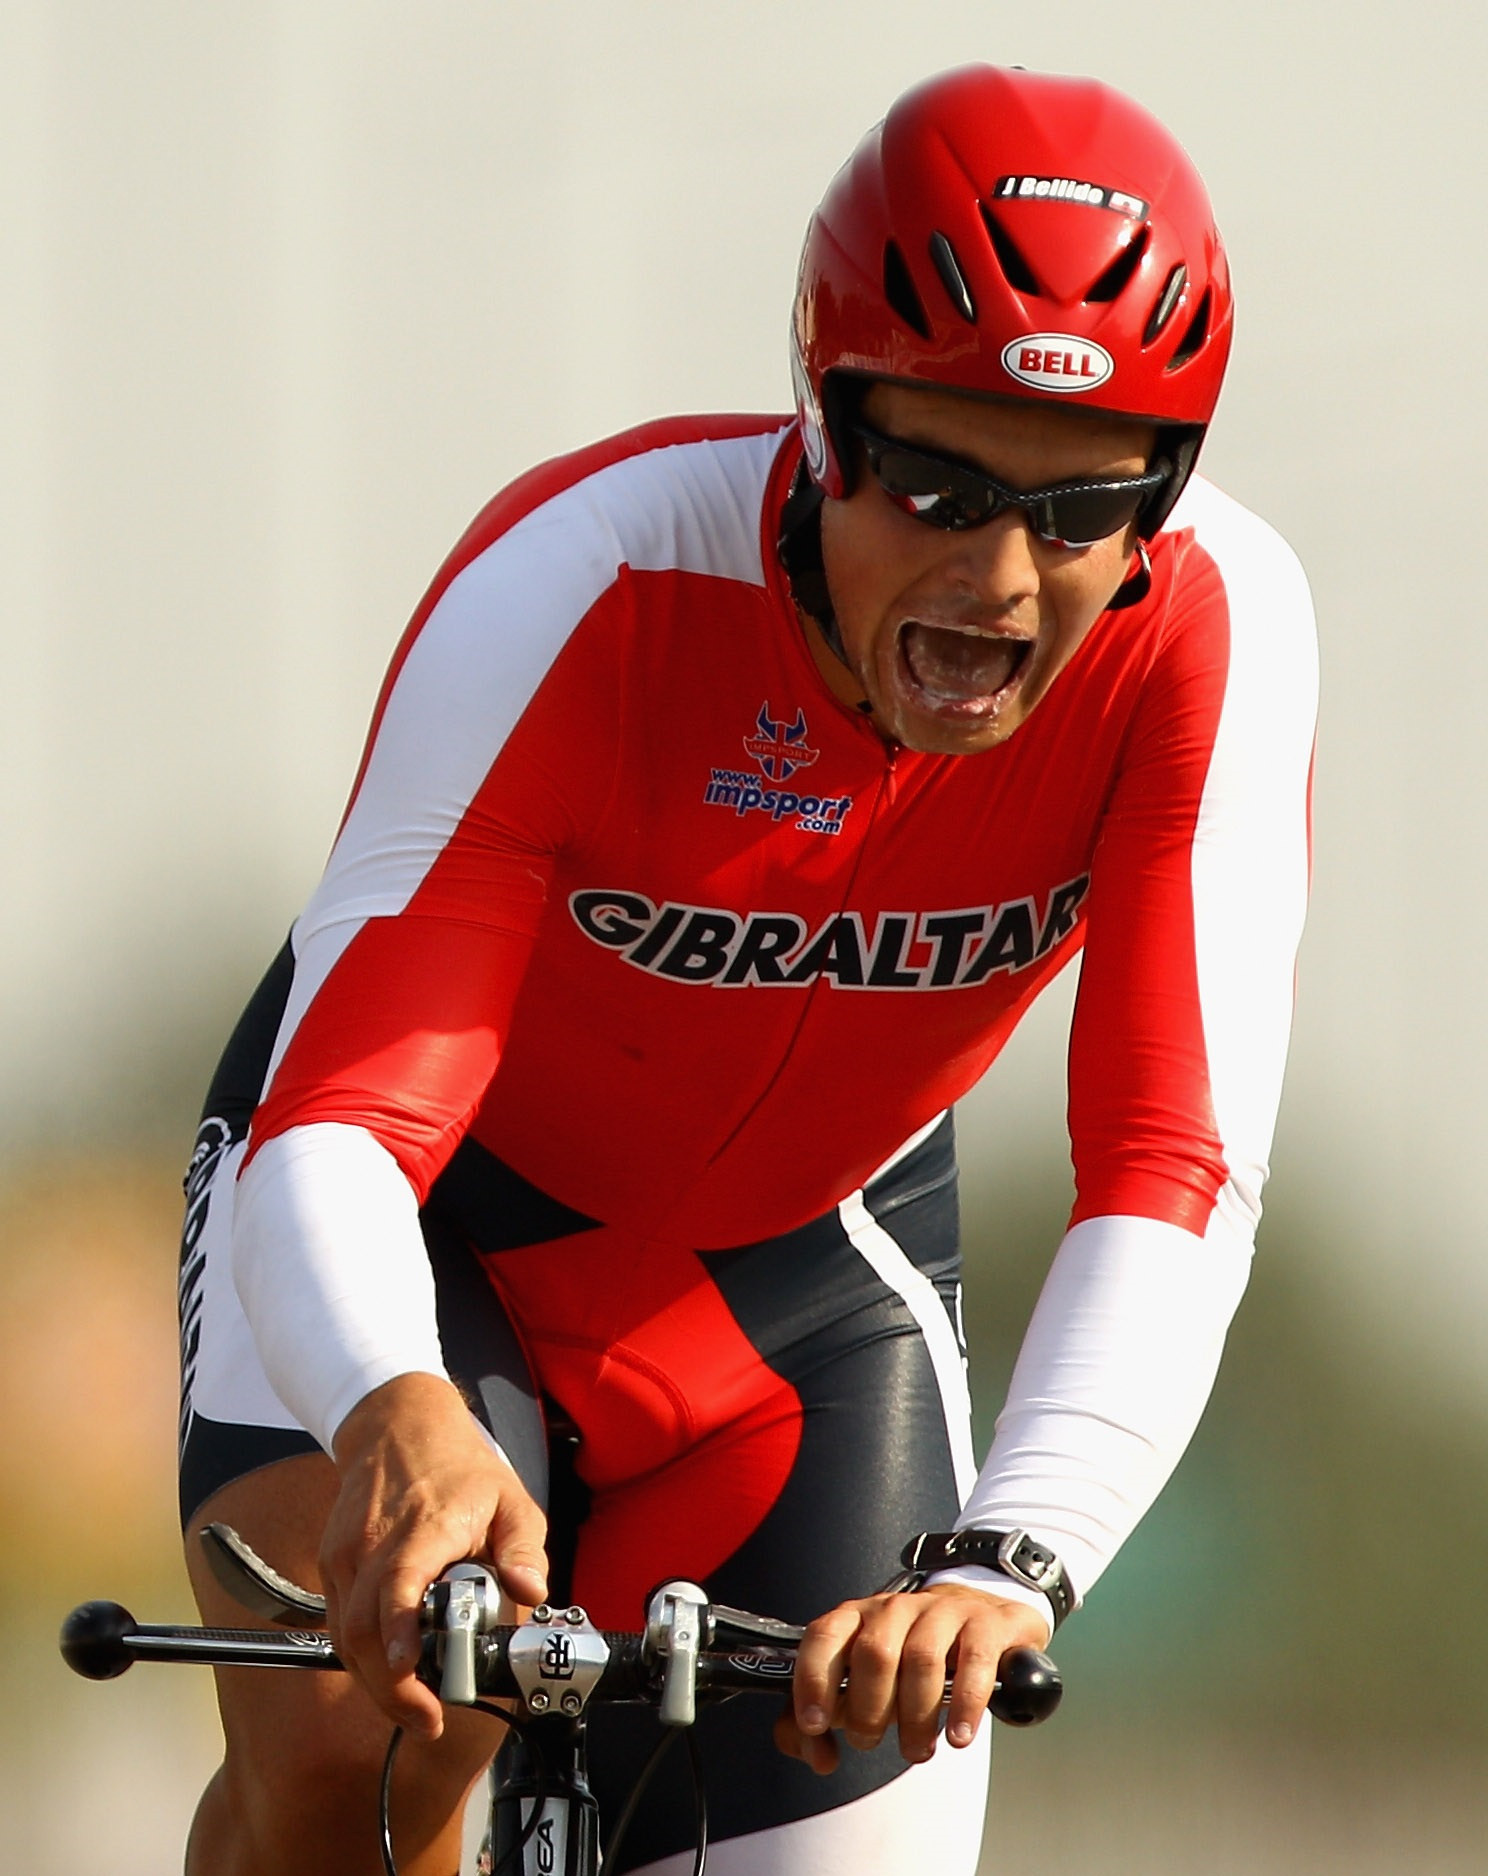 Cyclist Julian Bellido is among the athletes that will compete for Gibraltar at Gold Coast 2018 ©Getty Images